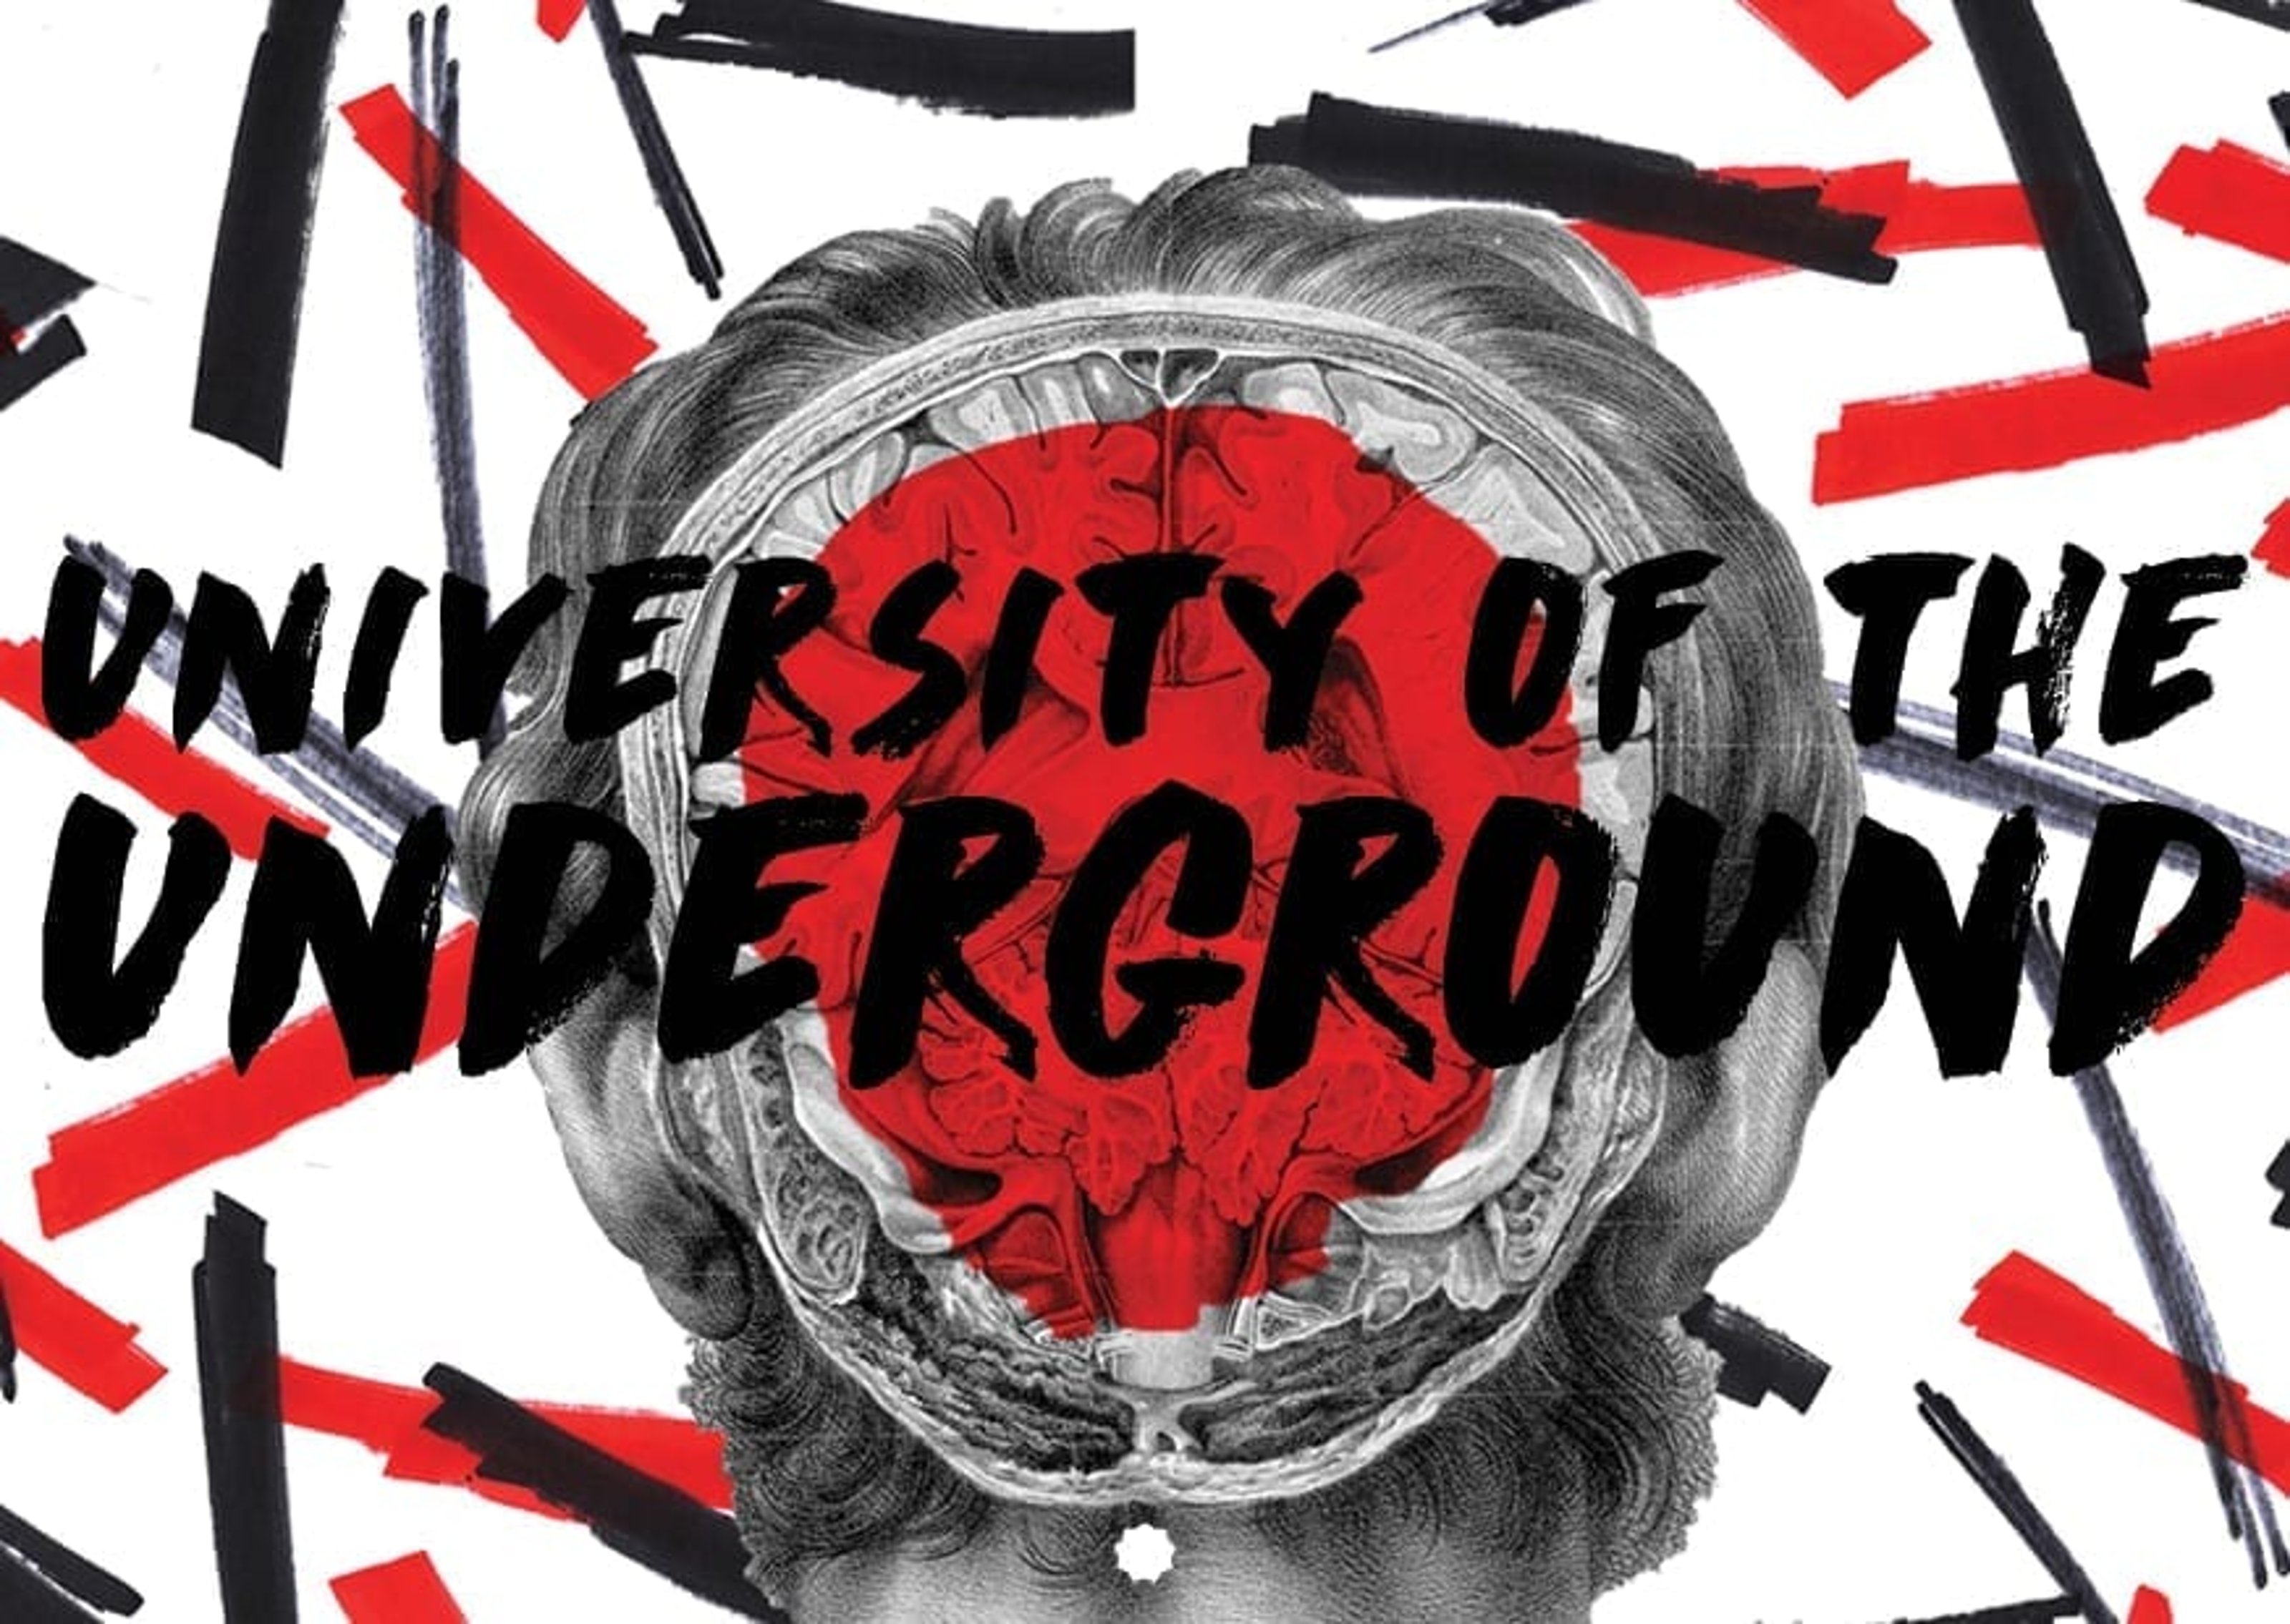 University of the Underground logo in front of an illustration showing the brain of a human inside his skull